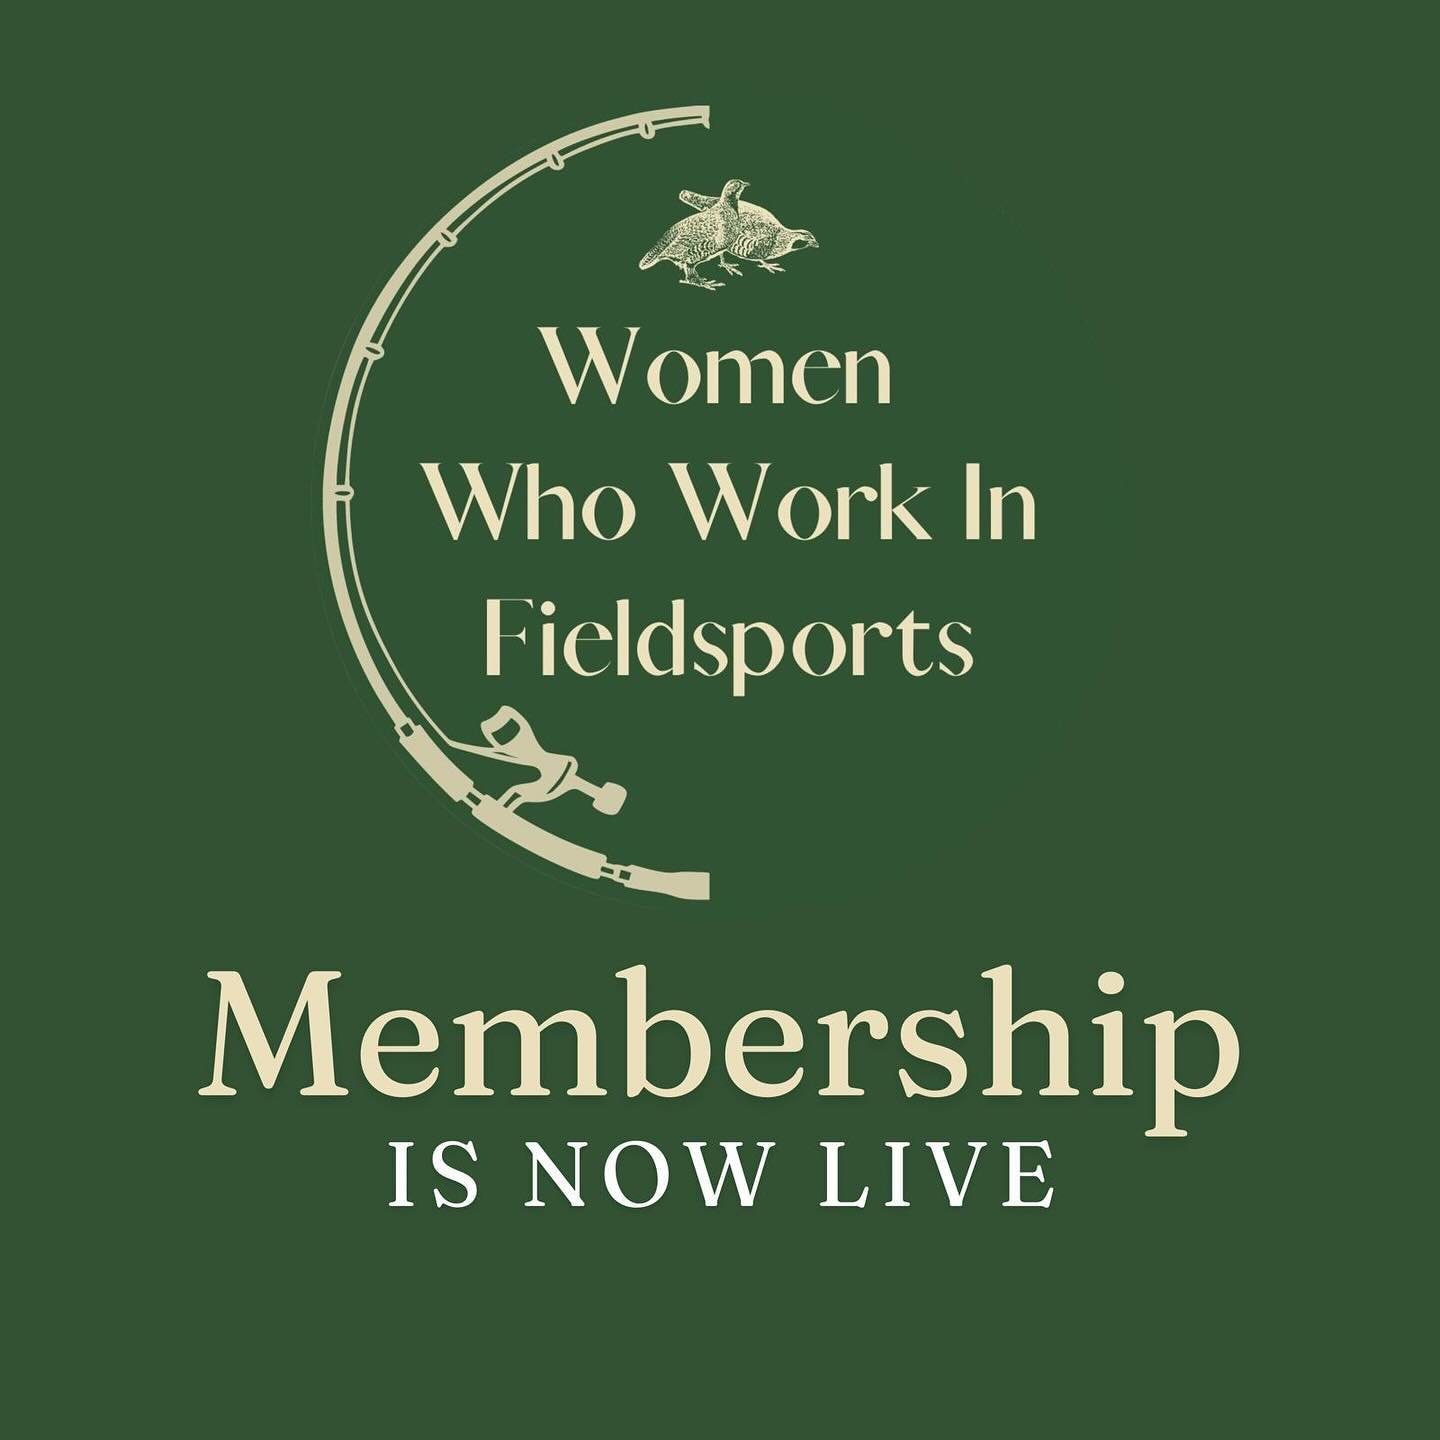 Introducing Our WWWF Membership: Join Us Today!

Exciting news! Today marks the official launch of our highly anticipated Women Who Work in Fieldsports Membership Programme! We&rsquo;re thrilled to extend an invitation to you to become a part of our 